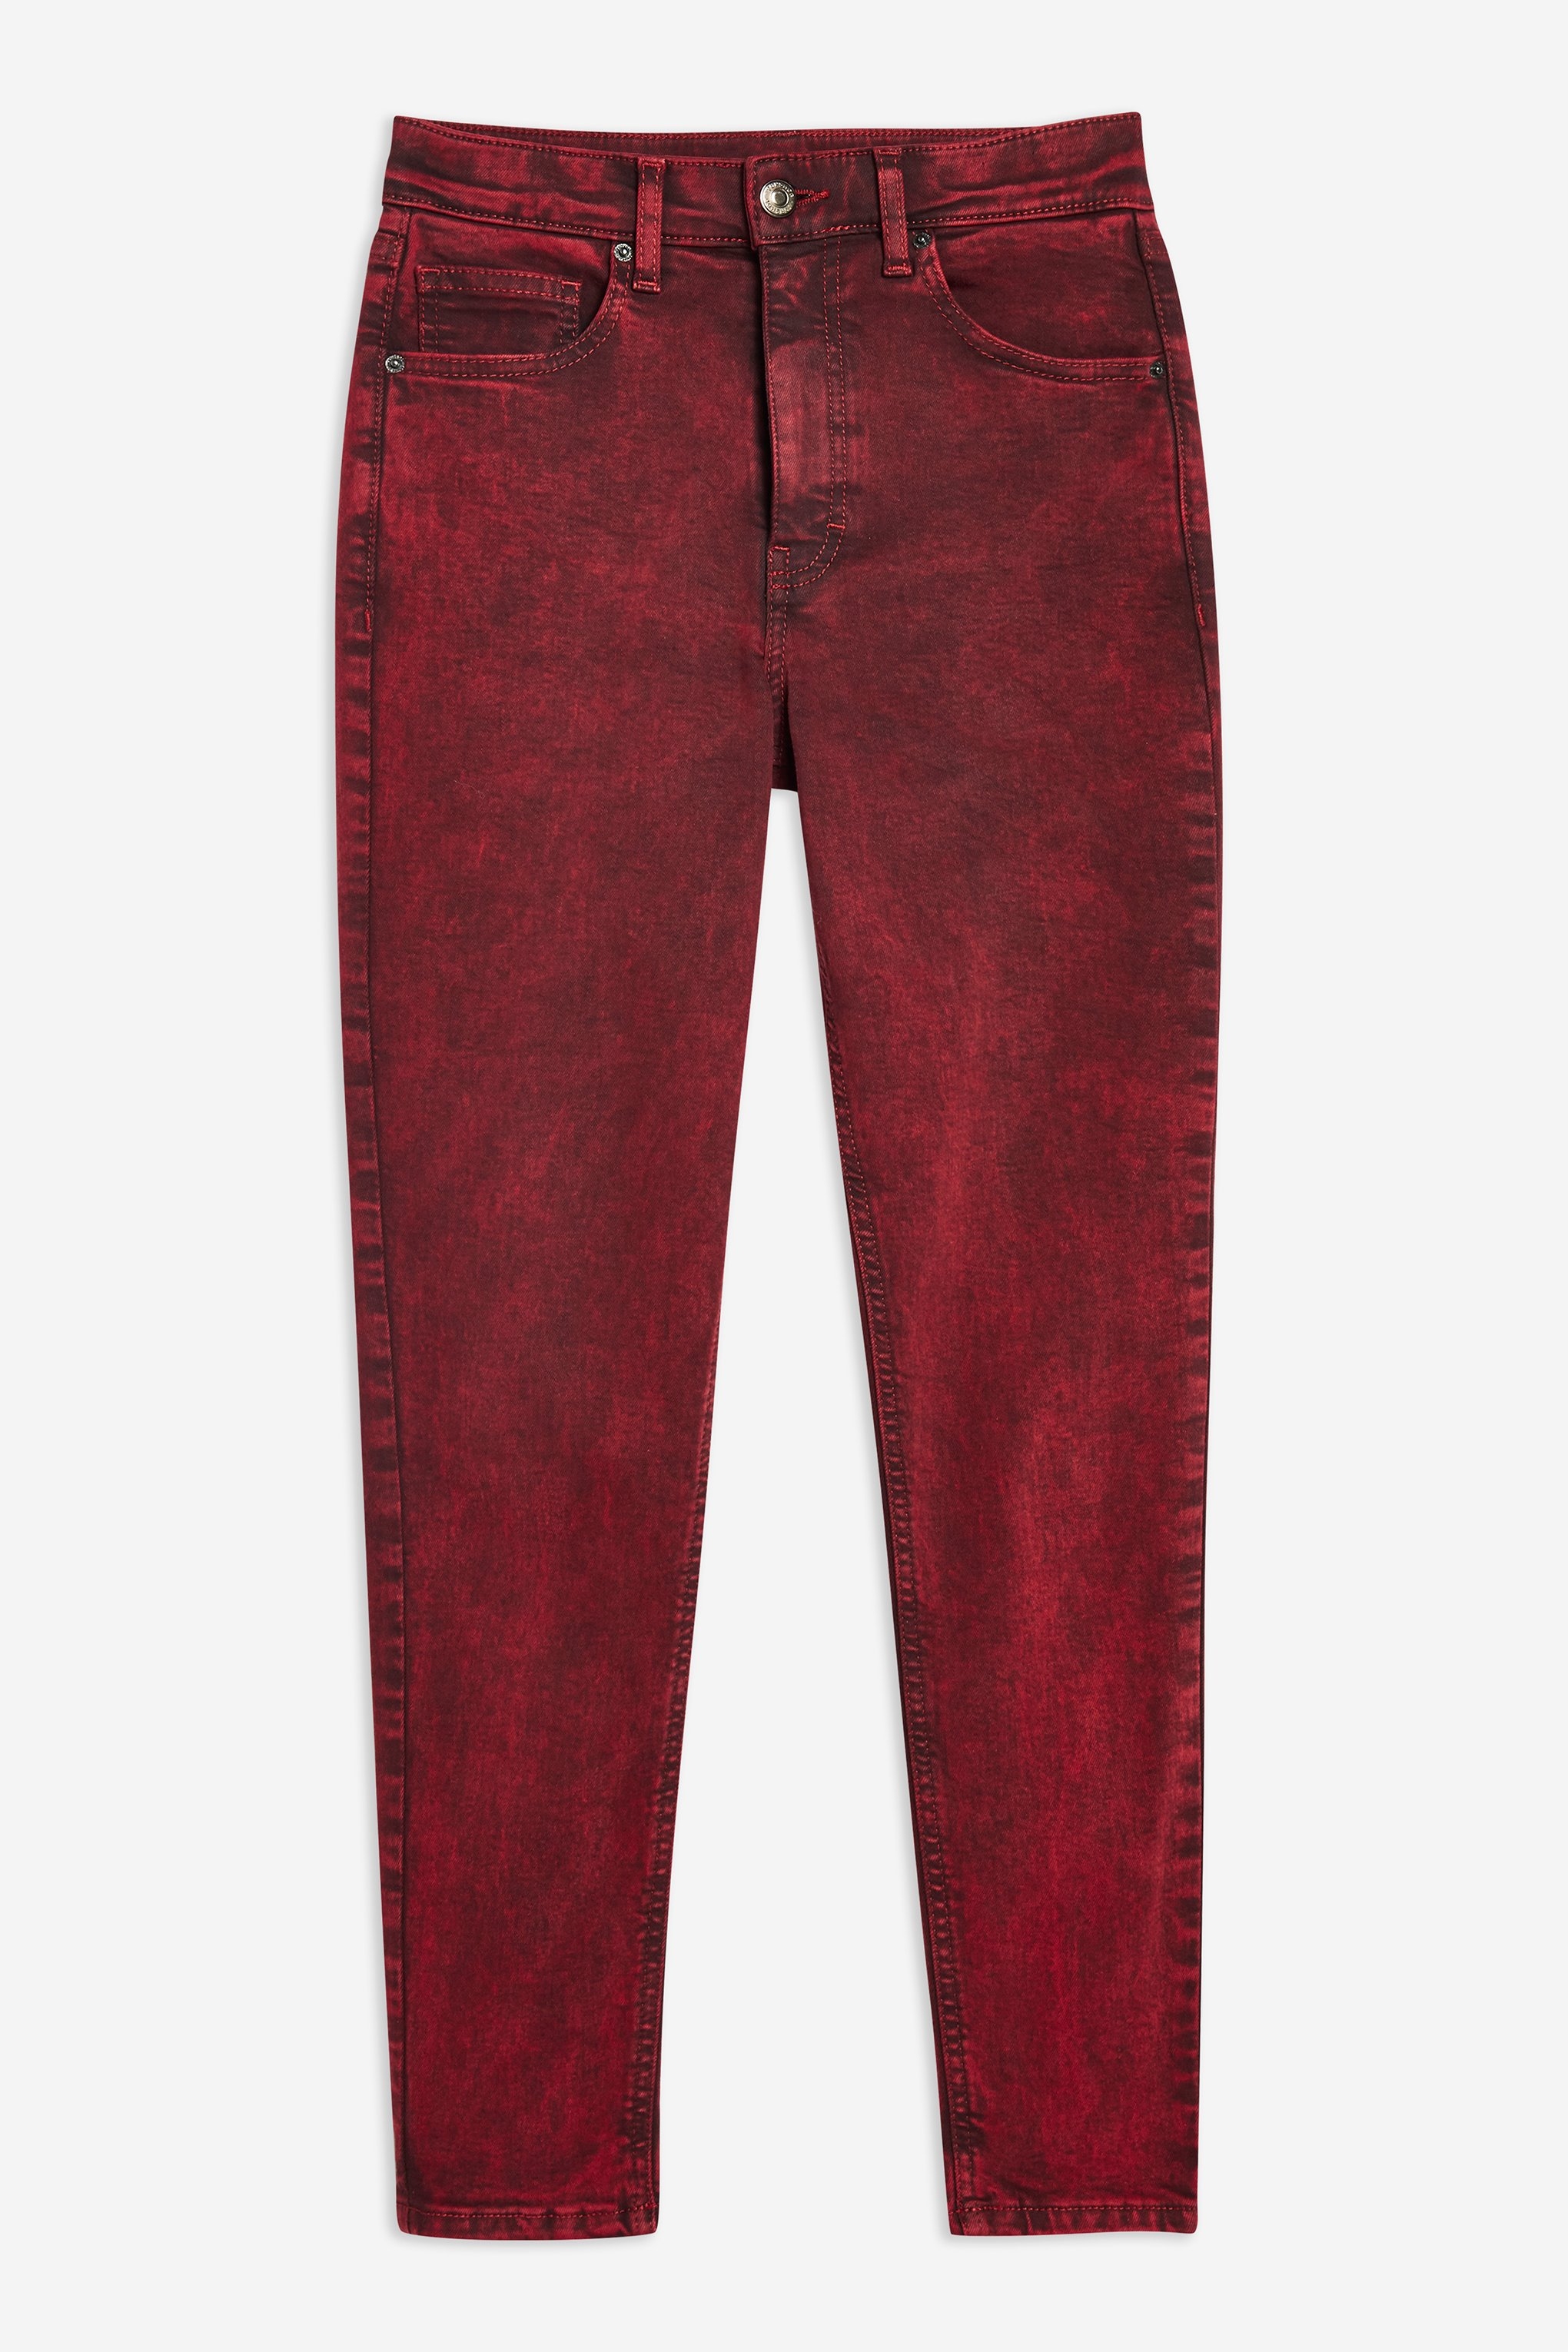 topshop red jeans